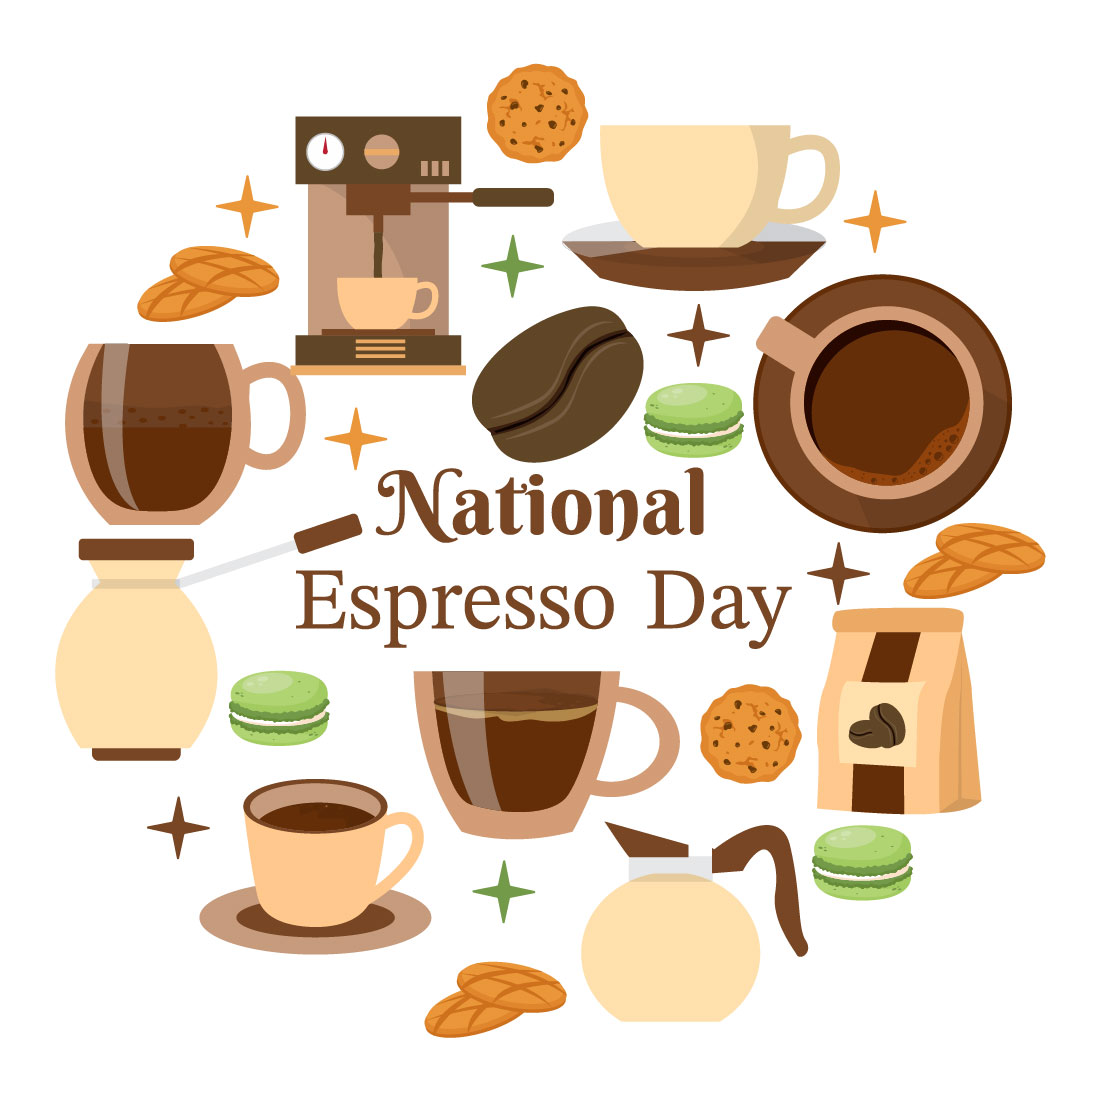 10 National Espresso Day Illustration preview image.